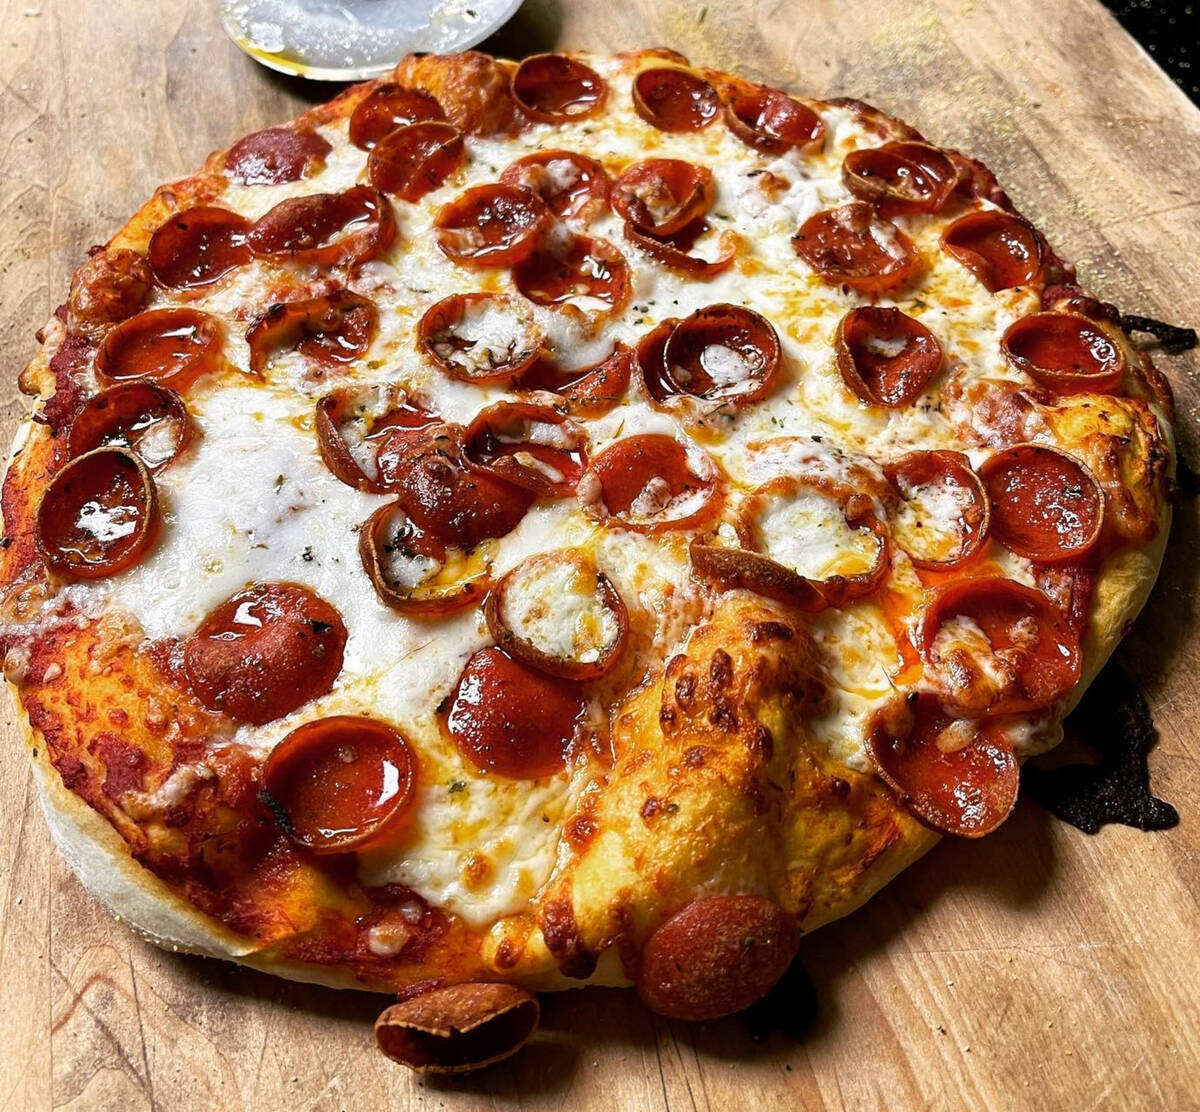 A pepperoni pie from Rufino's Pizzeria, which is set to open soon, in spring 2023, in downtown ...